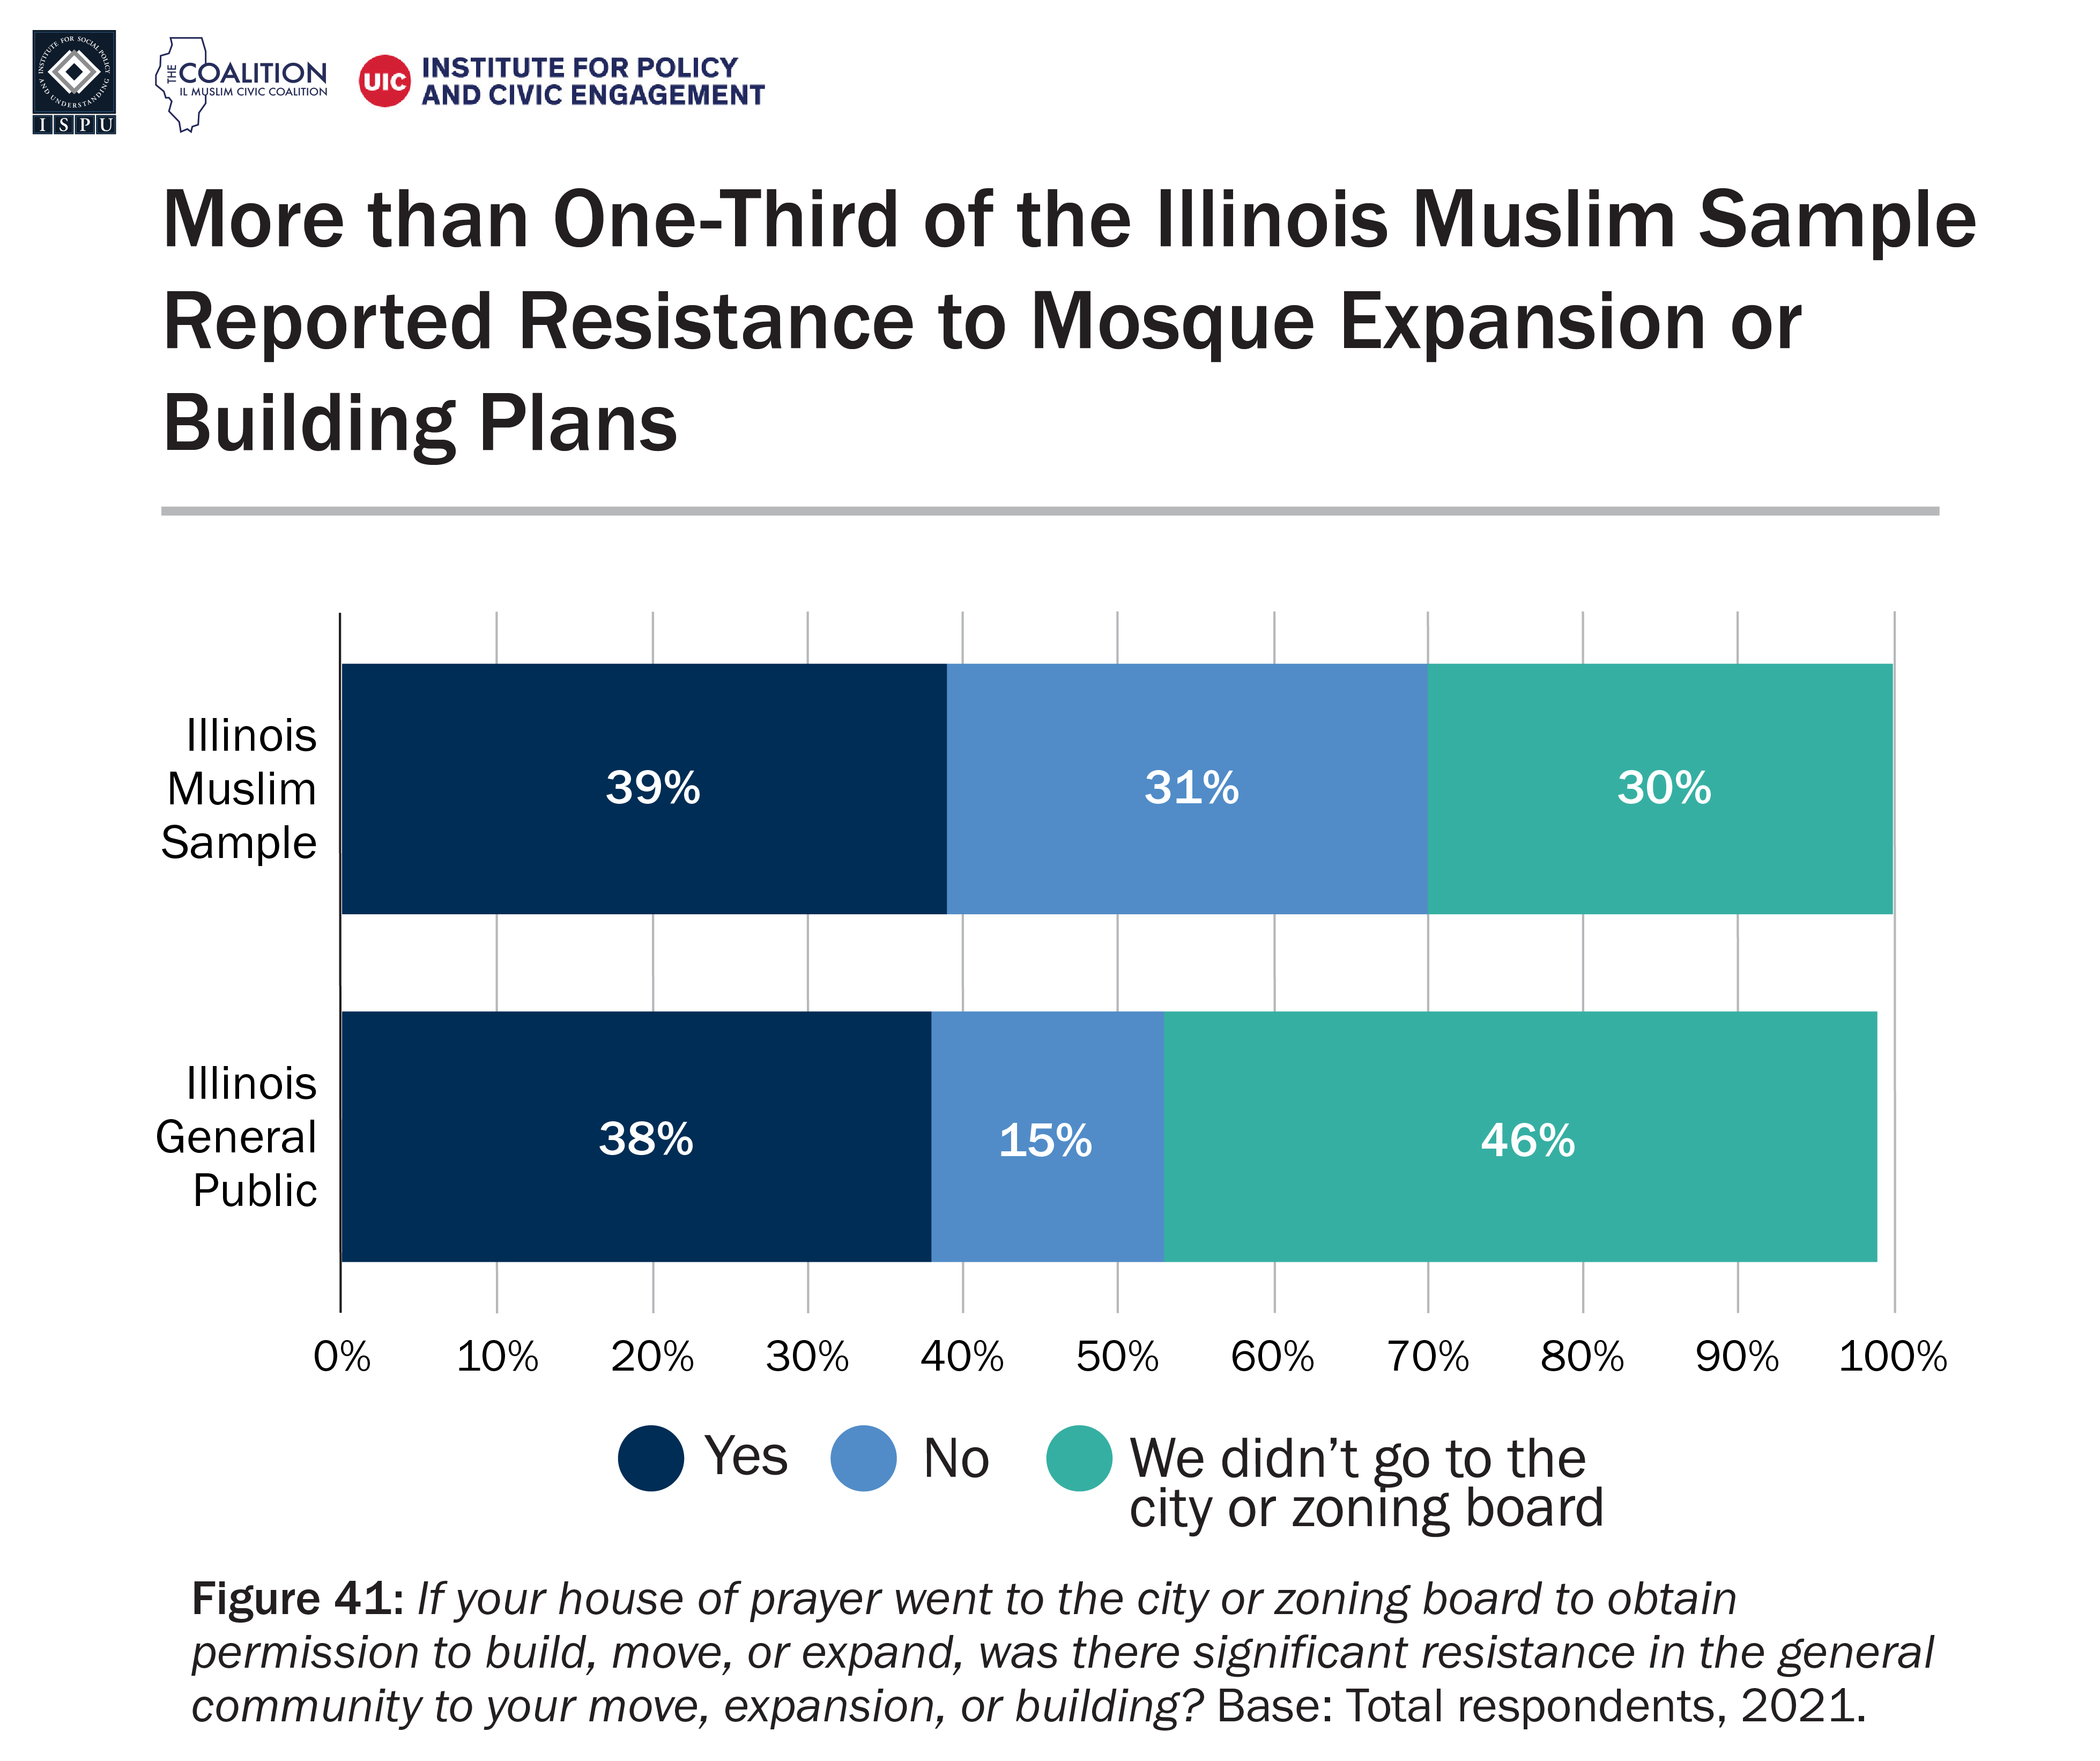 A bar graph showing proportion of the Illinois Muslim sample and Illinois general public who faced resistance to mosque opposition or building plans